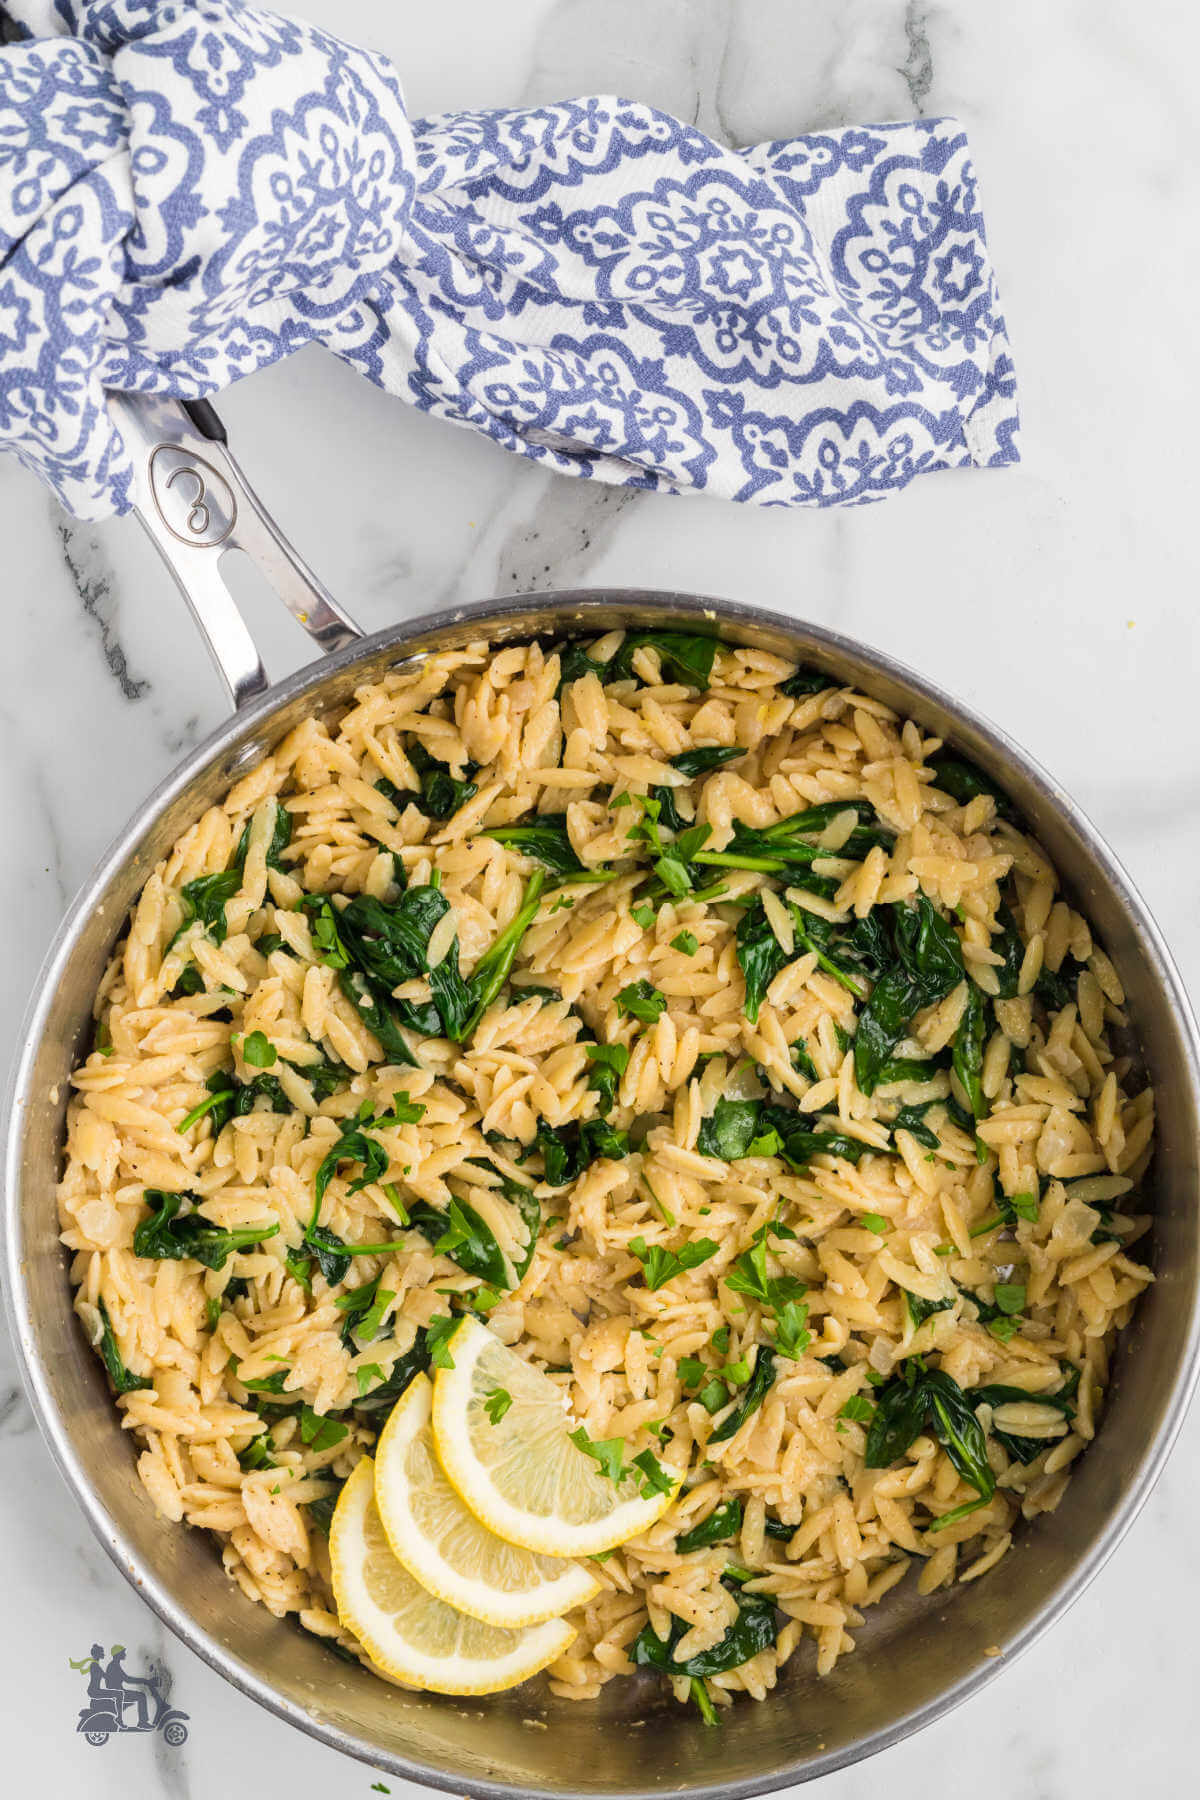 The rice shaped pasta orzo made into a risotto like dish with spinach and lemon flavoring. 